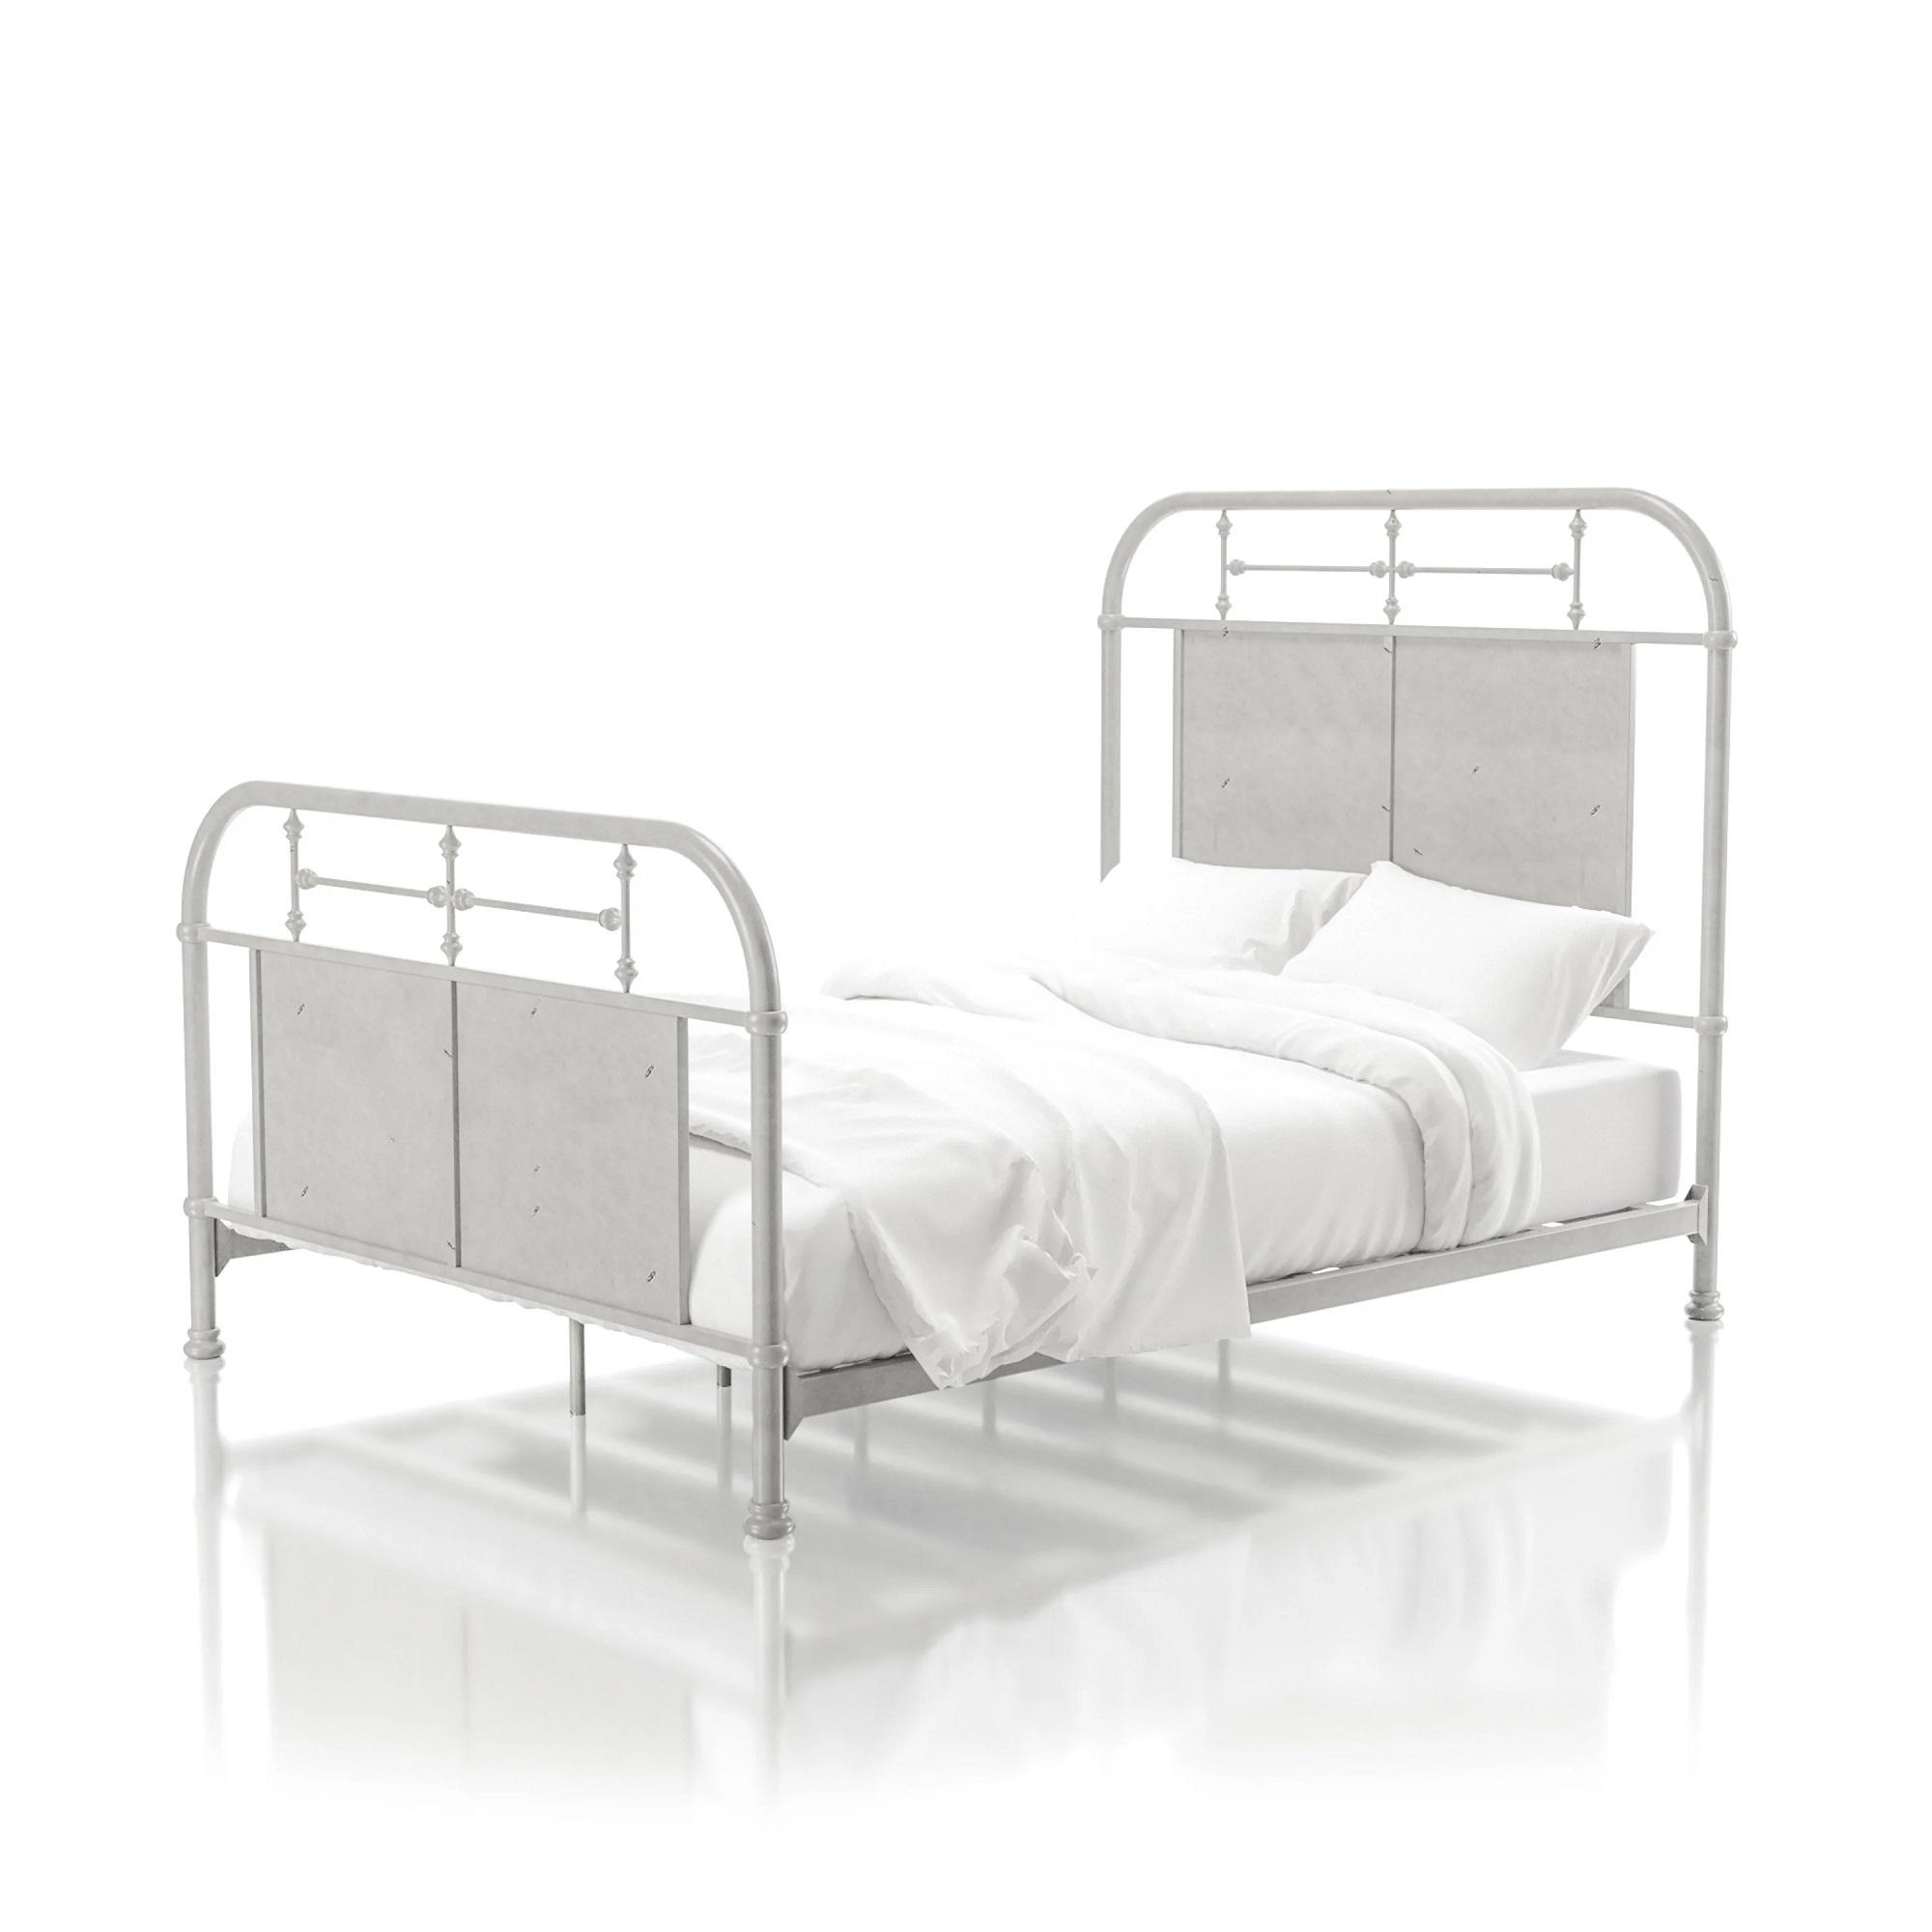 Transitional Metal Bed CM7502WH-T Haldus CM7502WH-T in White 